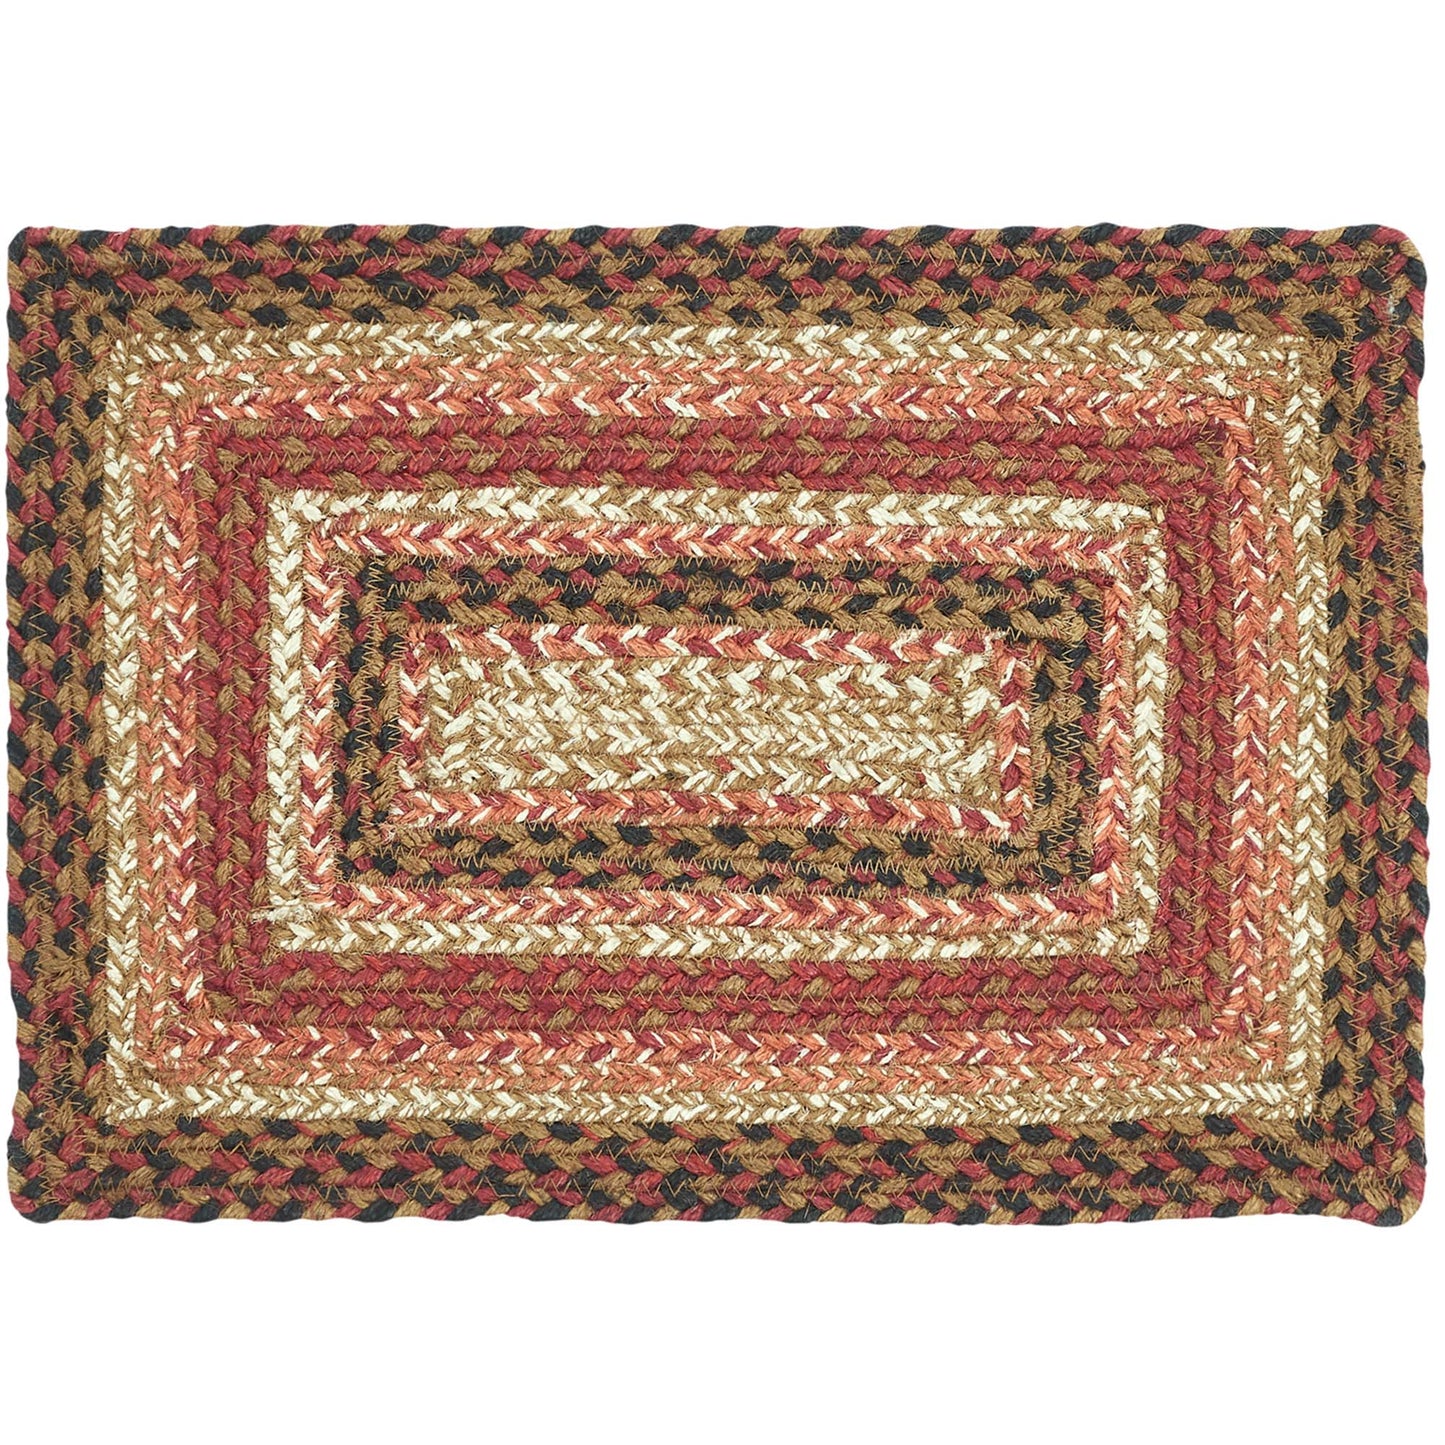 67131-Ginger-Spice-Jute-Rect-Placemat-10x15-image-4